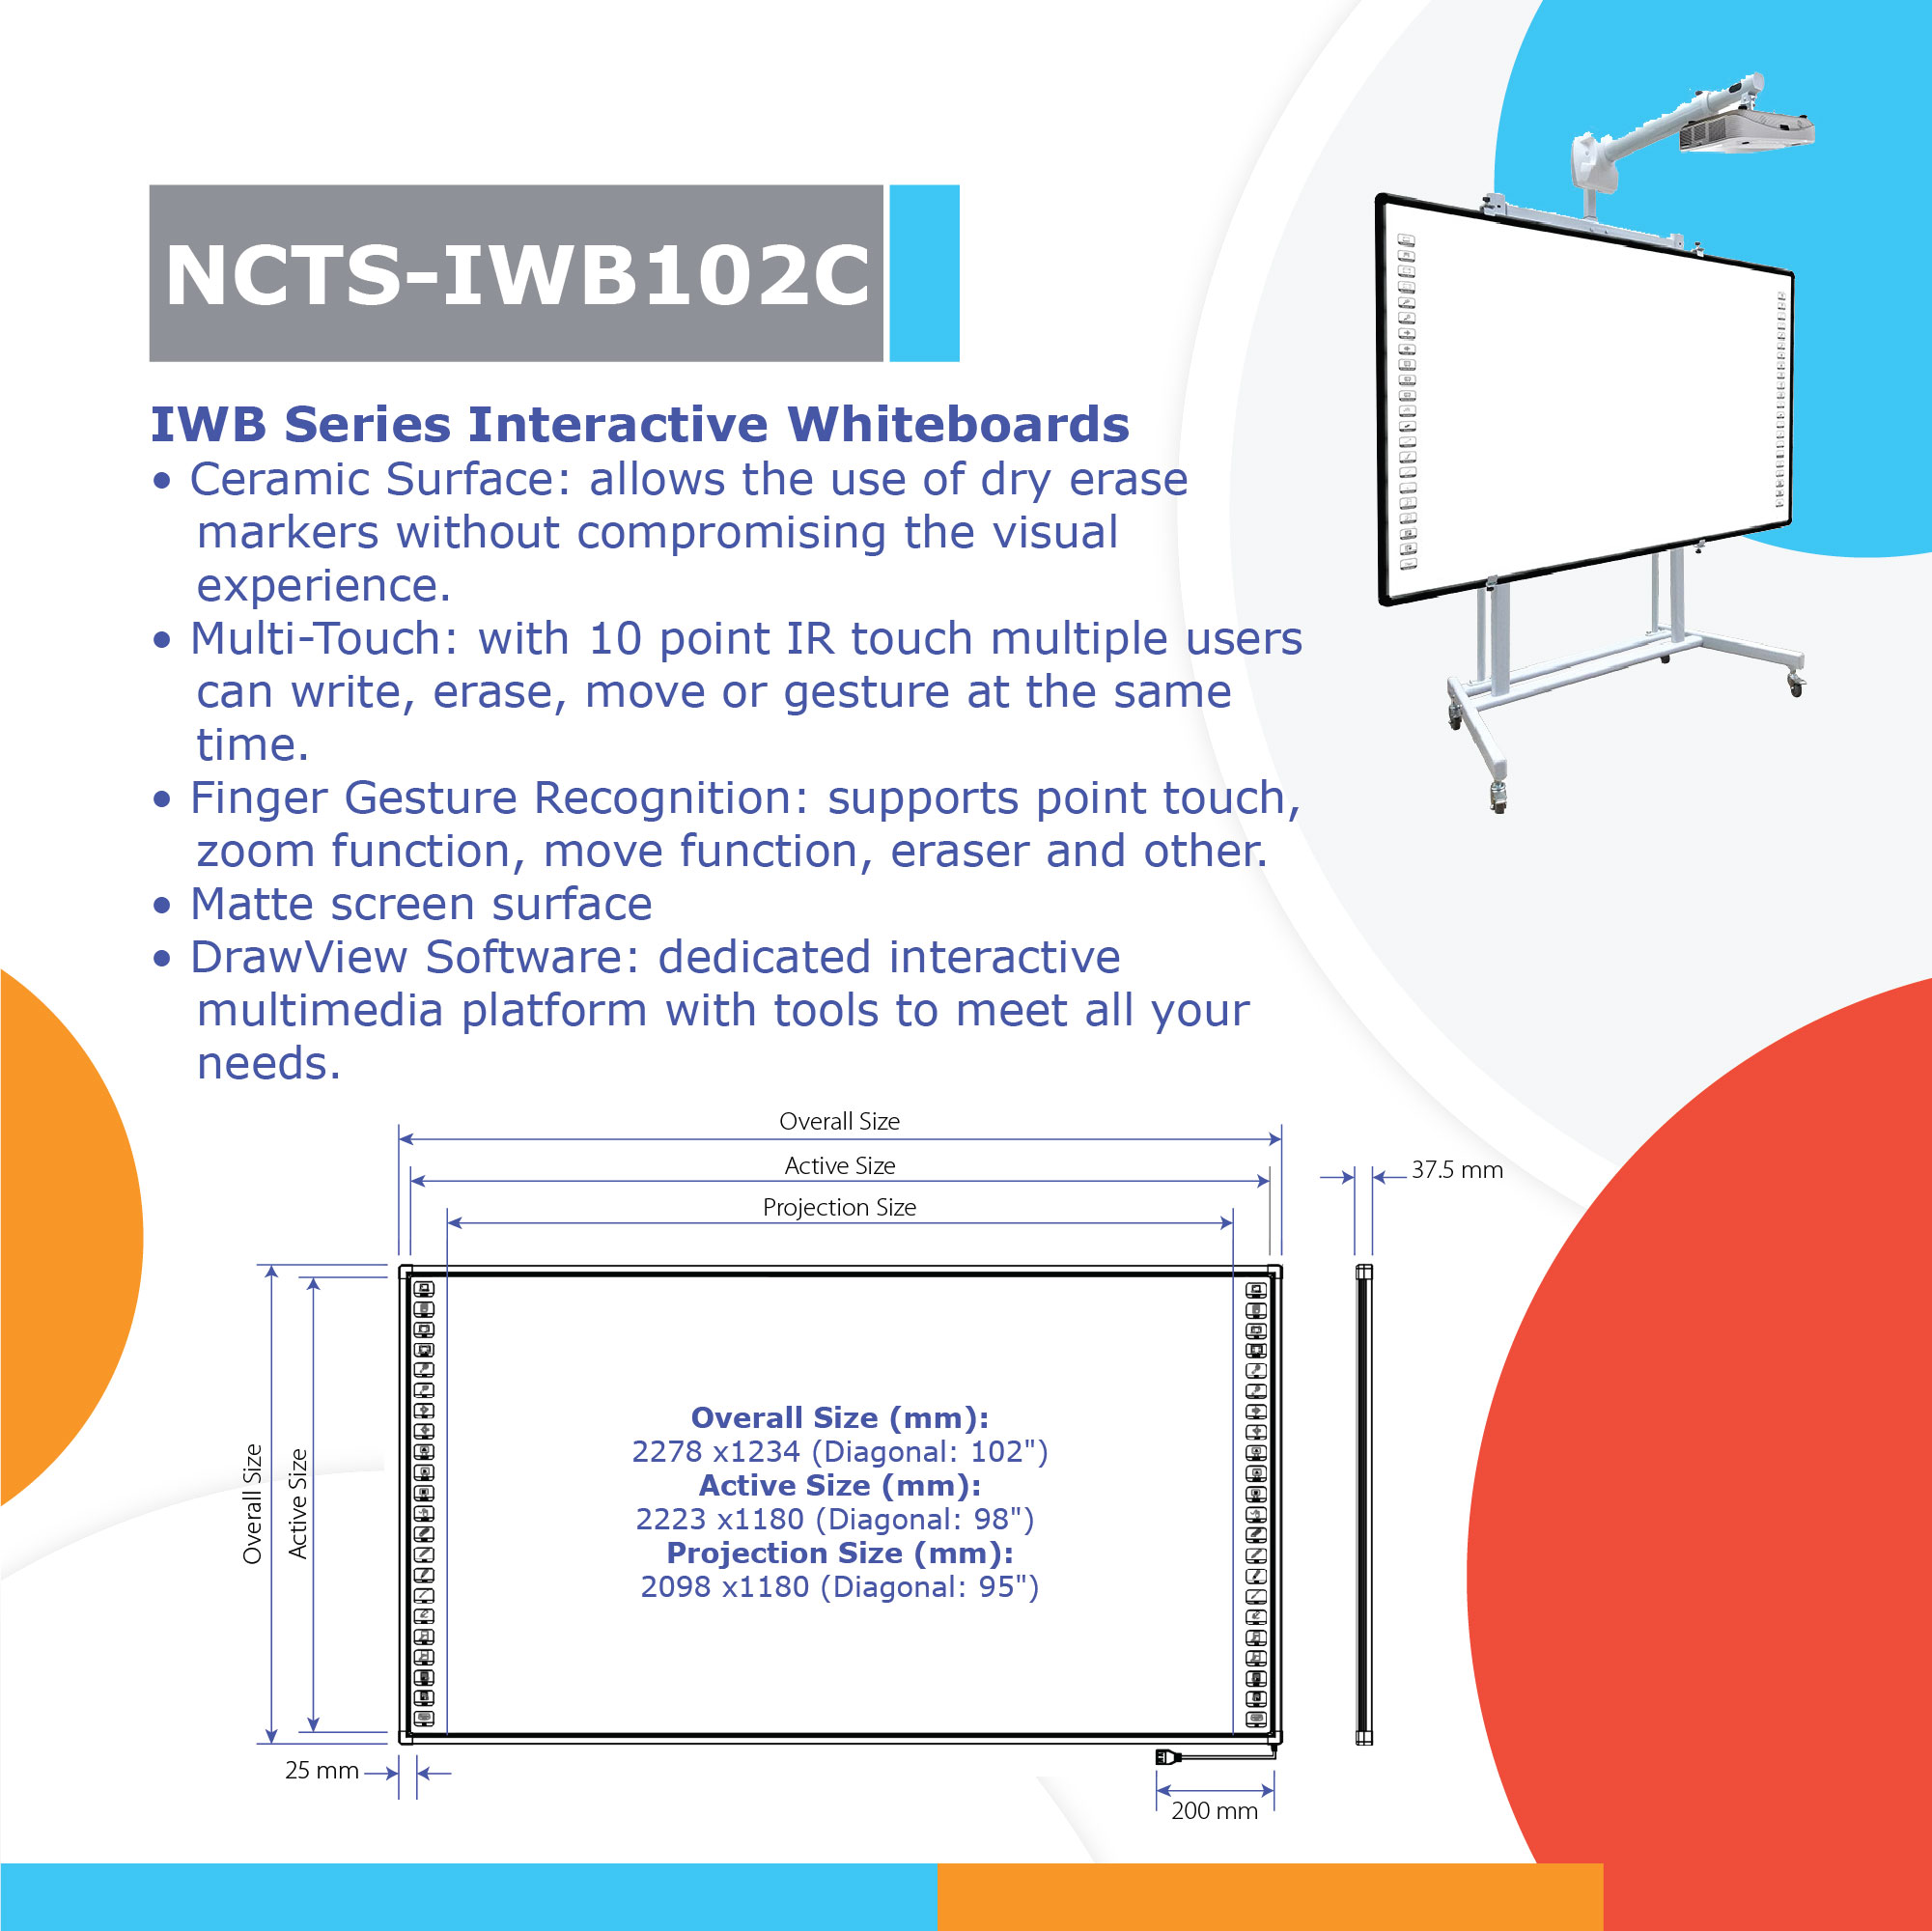 NCTS-IWB102C